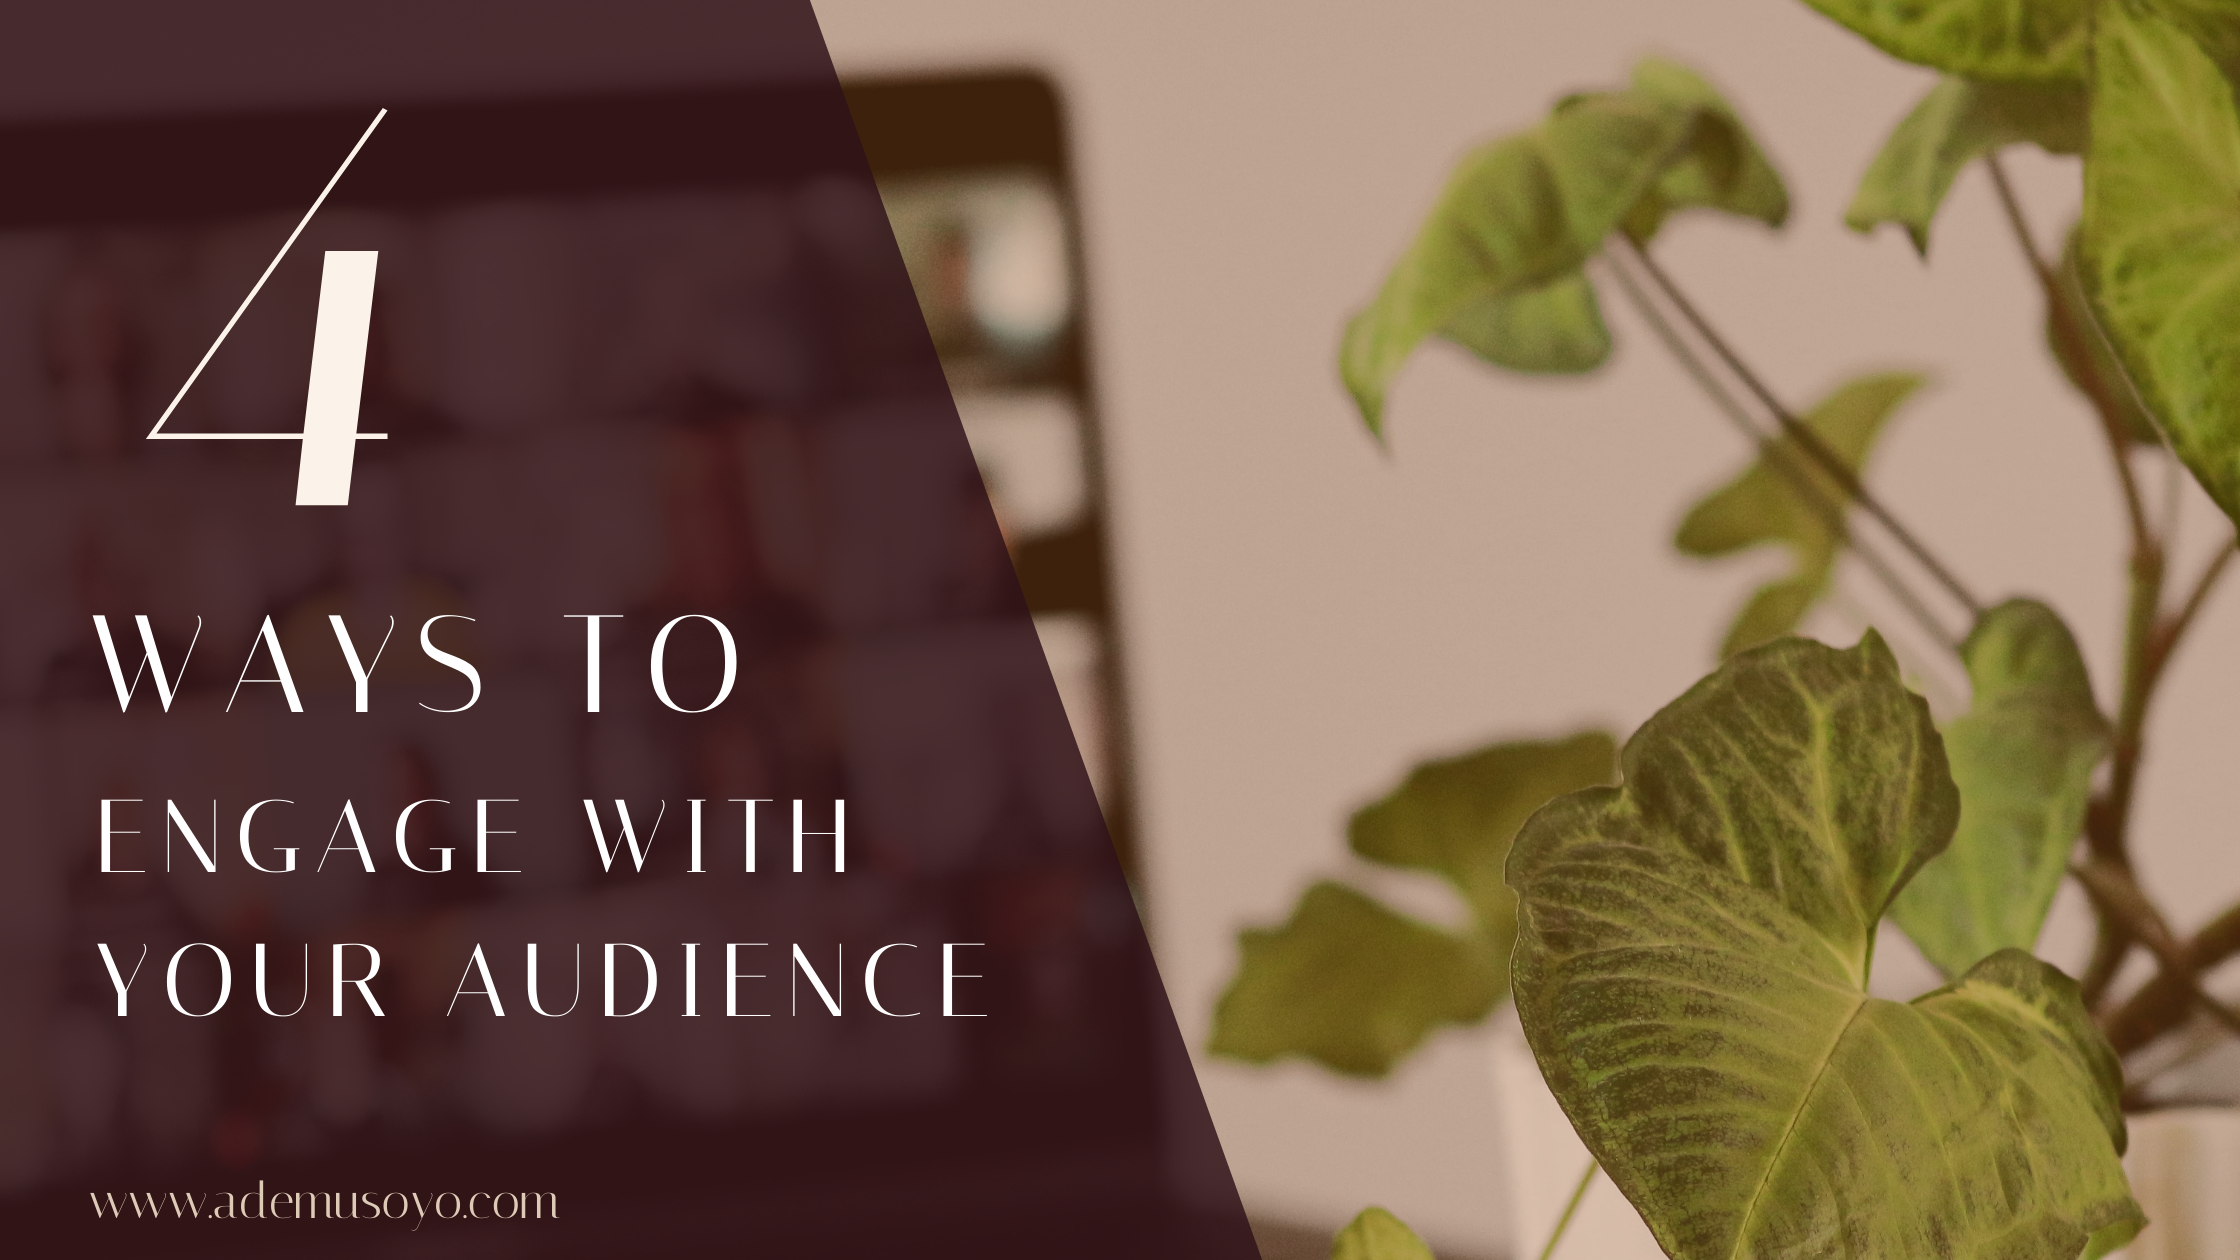 4 ways to engage with your audience, engagement strategy, audience engagement, engaging your audience, engaging the audience